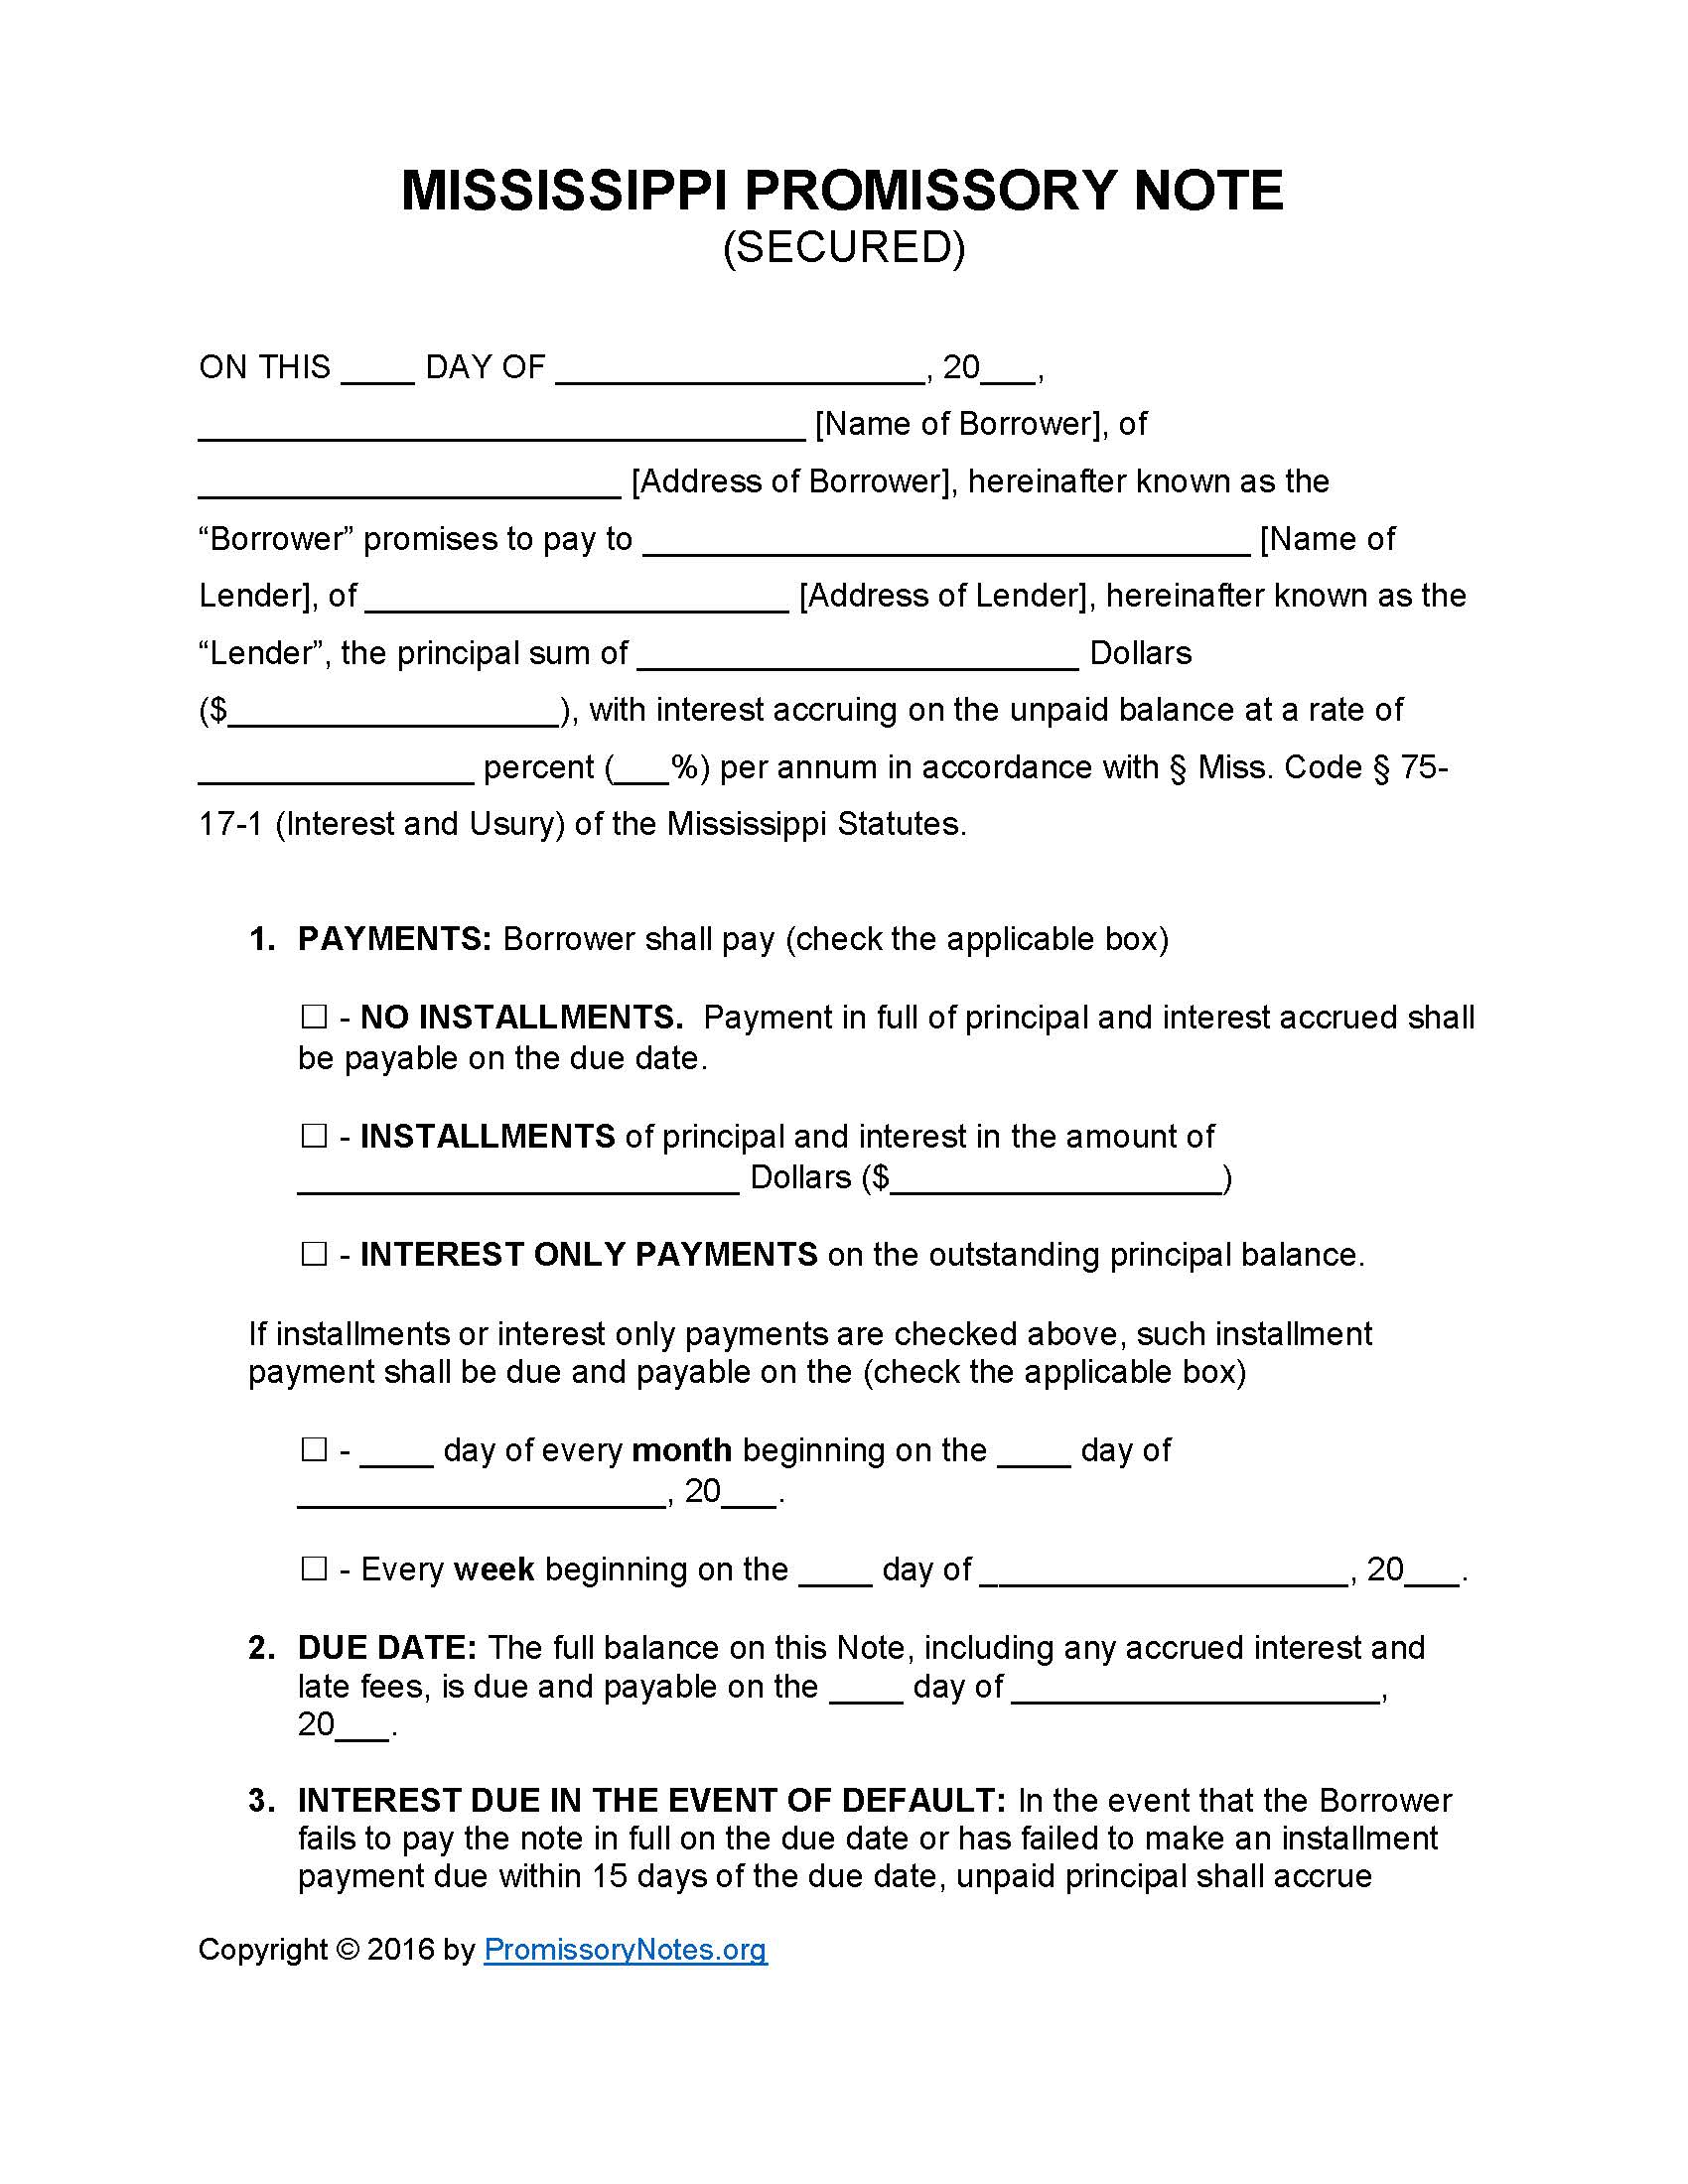 Mississippi Secured Promissory Note Template - Promissory Notes With collateral loan agreement template